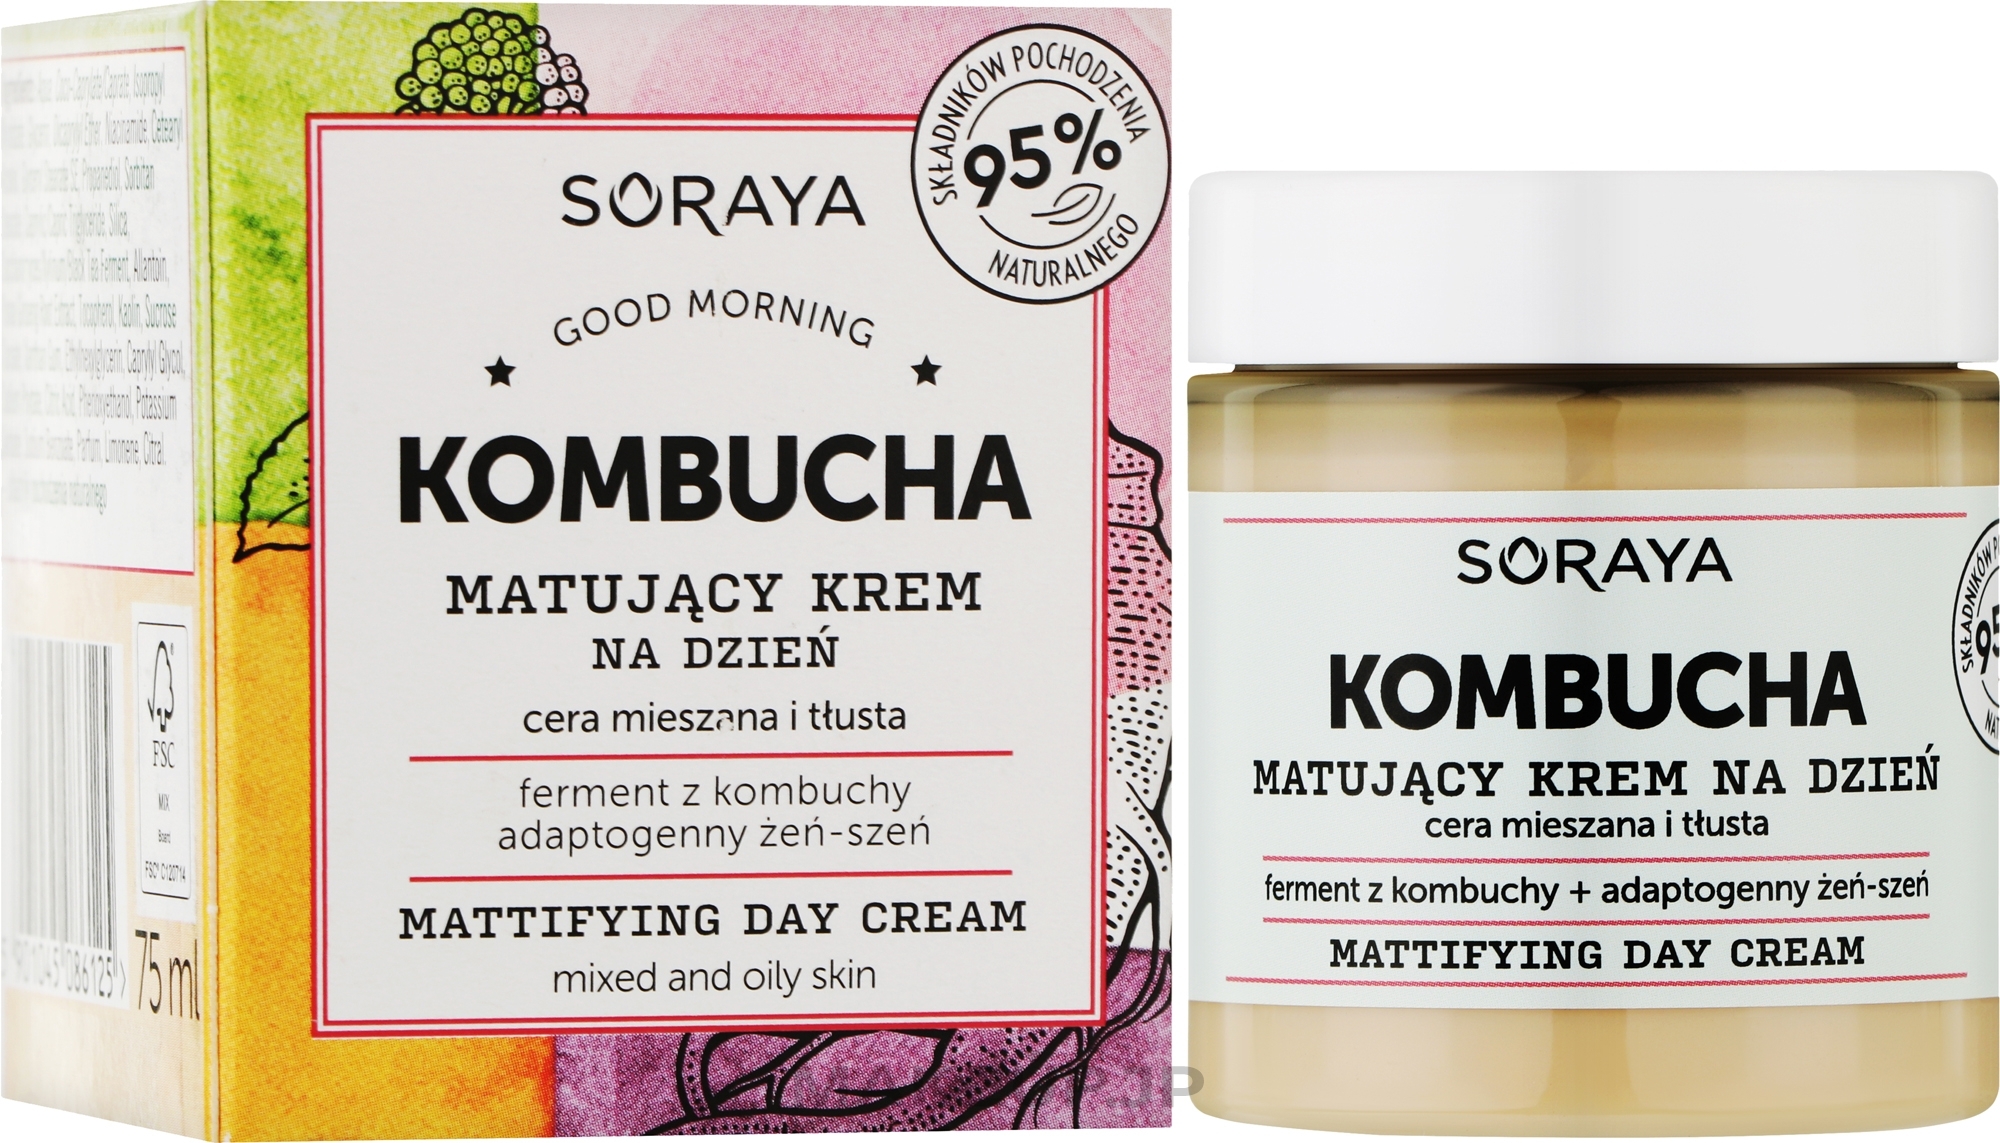 Mattifying Day Cream for Combination & Oily Skin - Soraya Kombucha Mattifying Day Cream — photo 75 ml